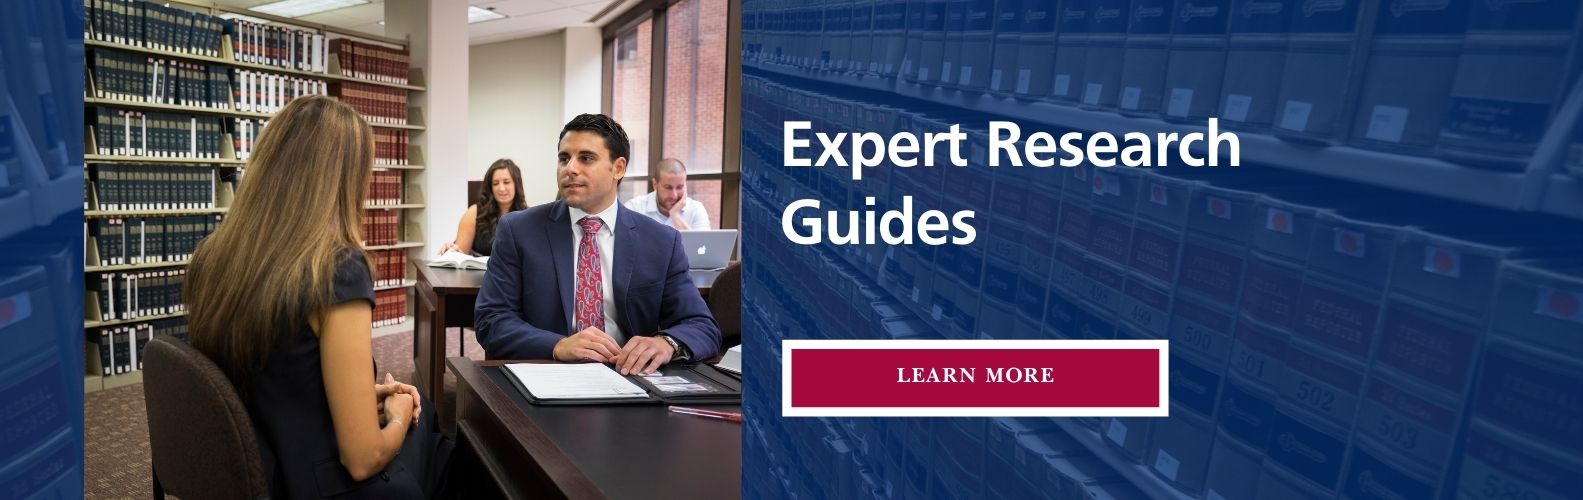 banner about expert research guides